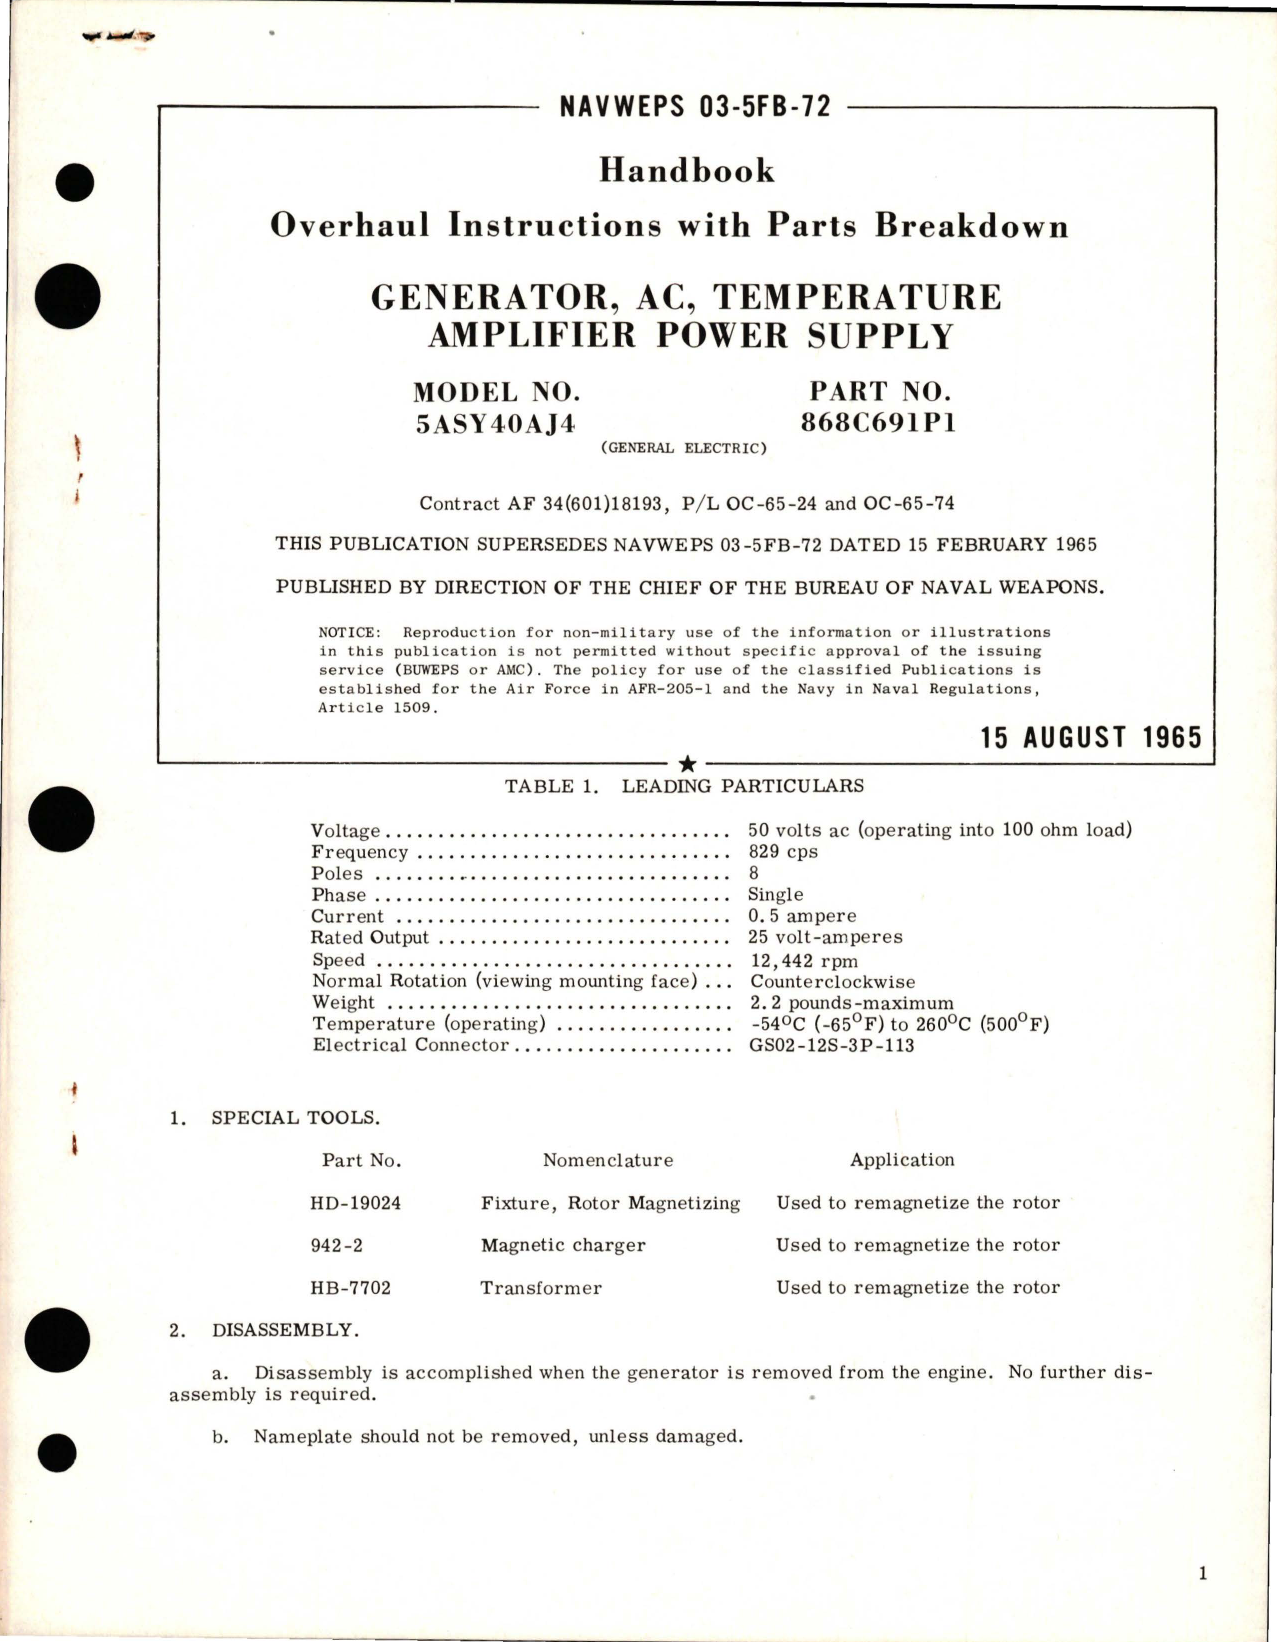 Sample page 1 from AirCorps Library document: Overhaul Instructions with Parts Breakdown for Temperature Amplifier Power Supply AC Generator - Model 5ASY40AJ4 - Part 868C691P1 